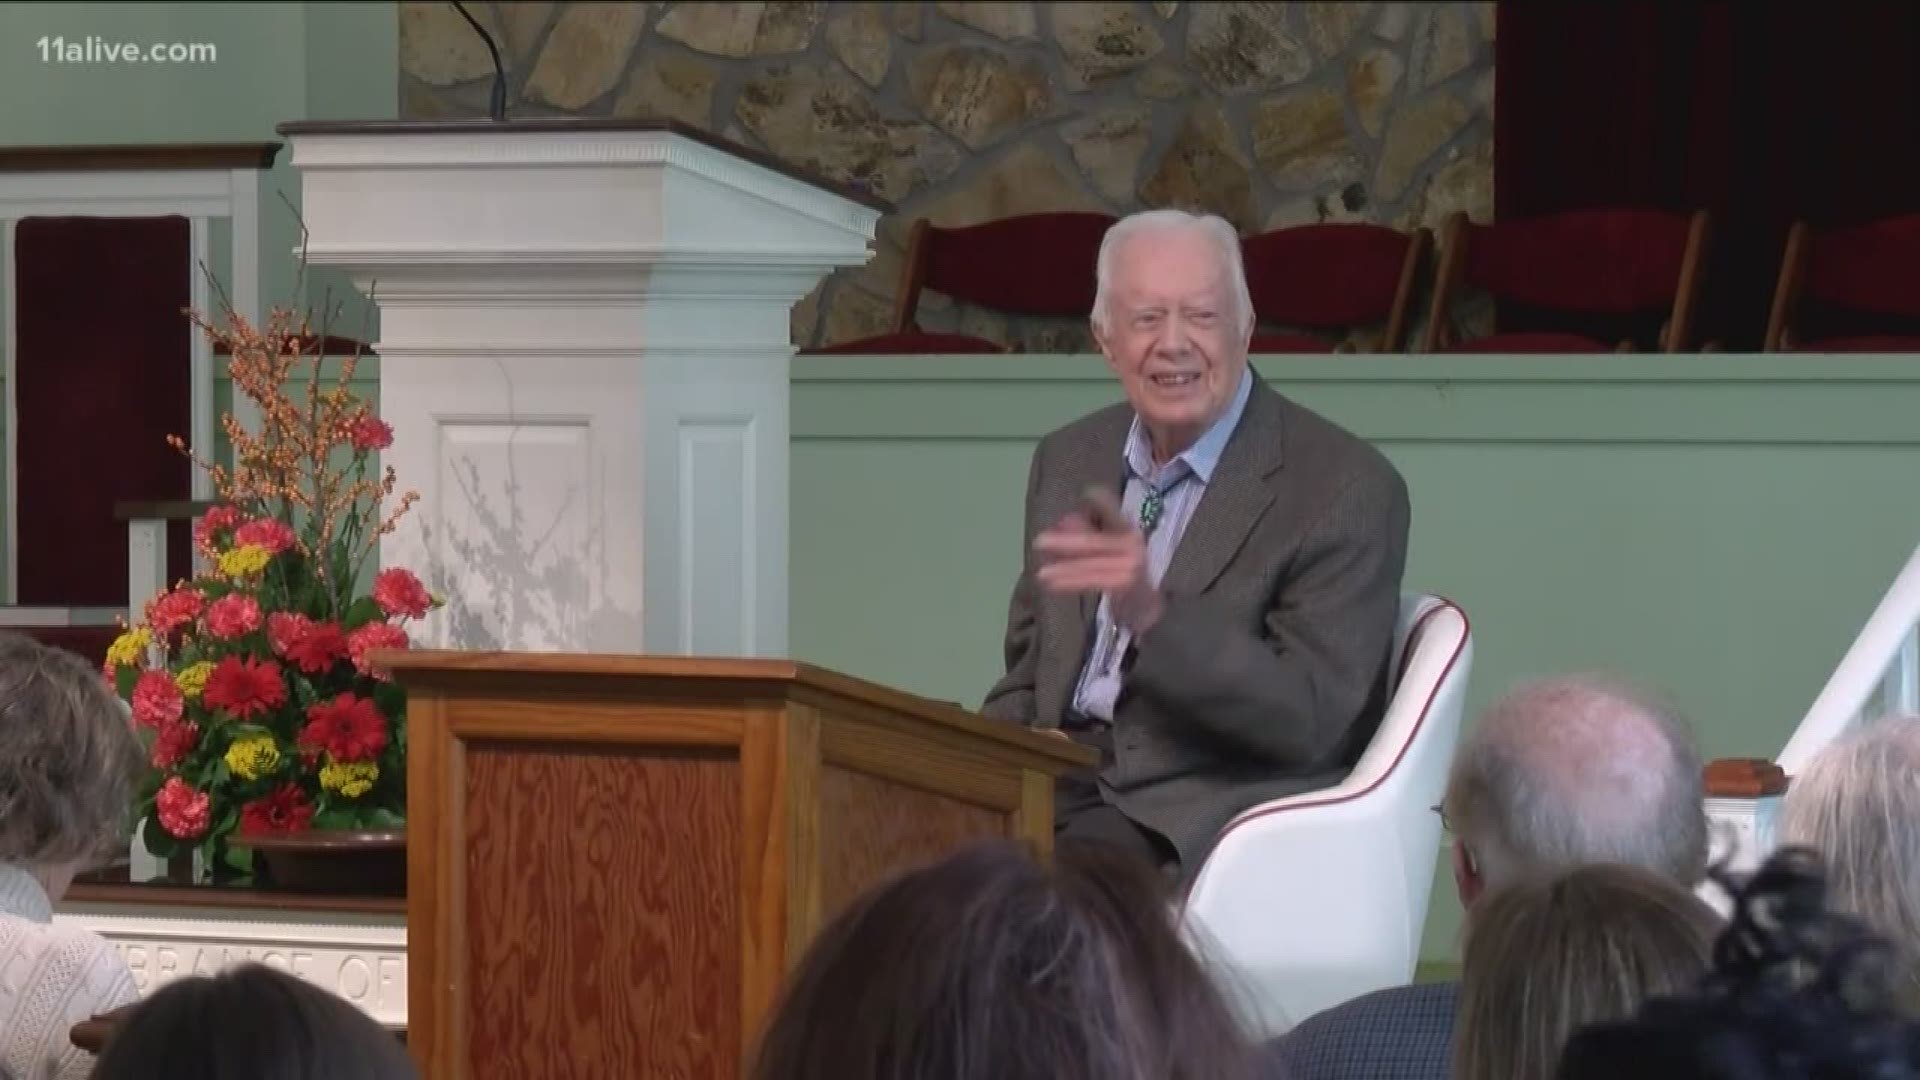 A fall left former President Carter with a minor pelvic fracture, but he was back at church on Sunday after missing only one week.